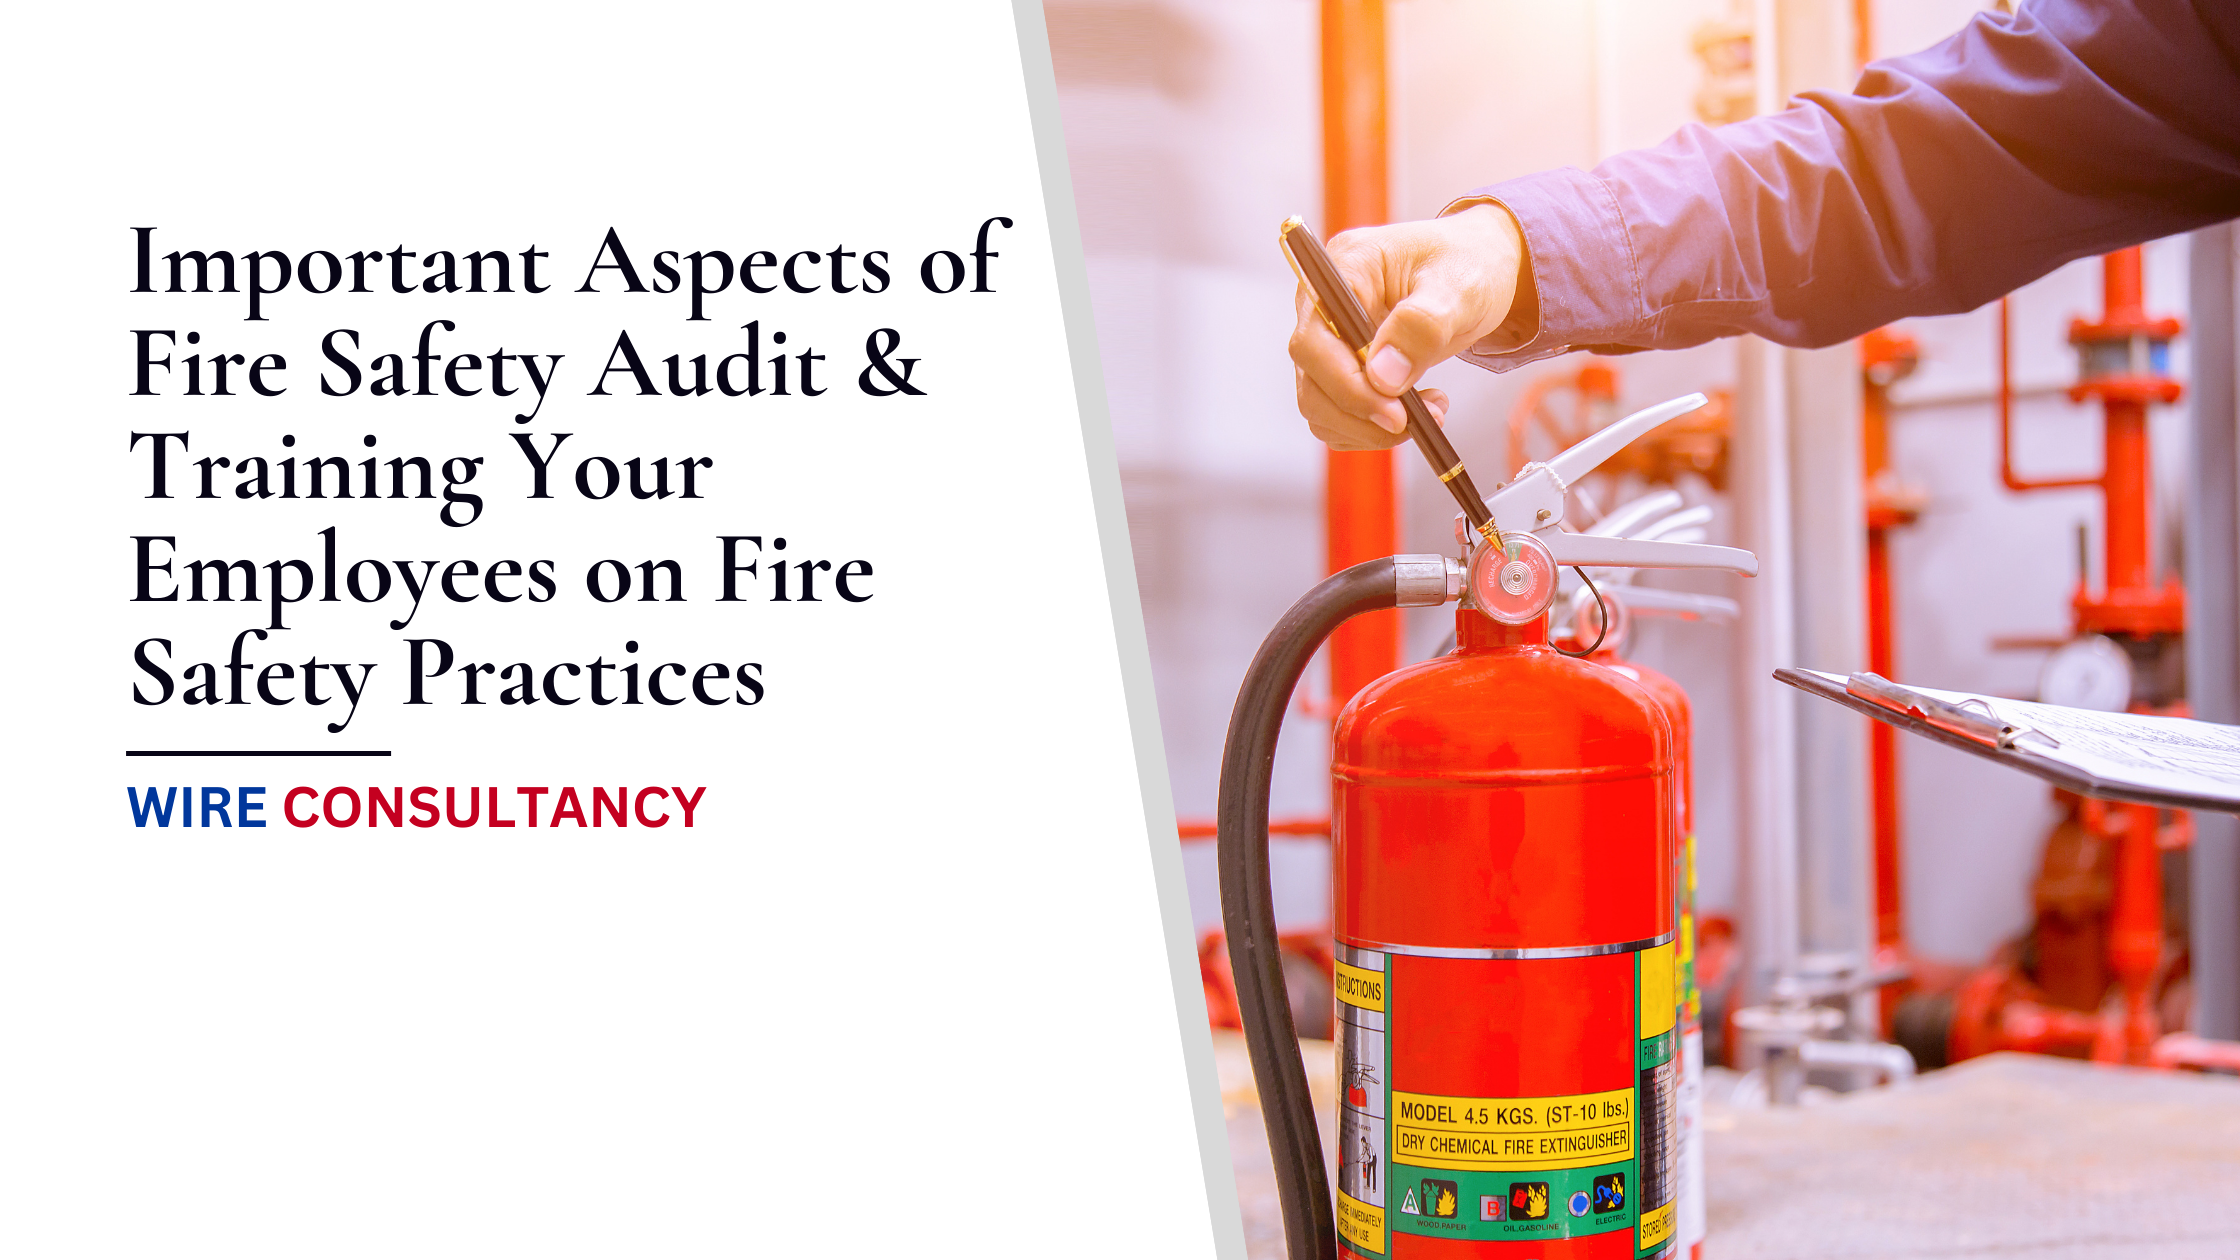 Important Aspects of Fire Safety Audit & How to Train Your Employees on Fire Safety Practices and Procedures